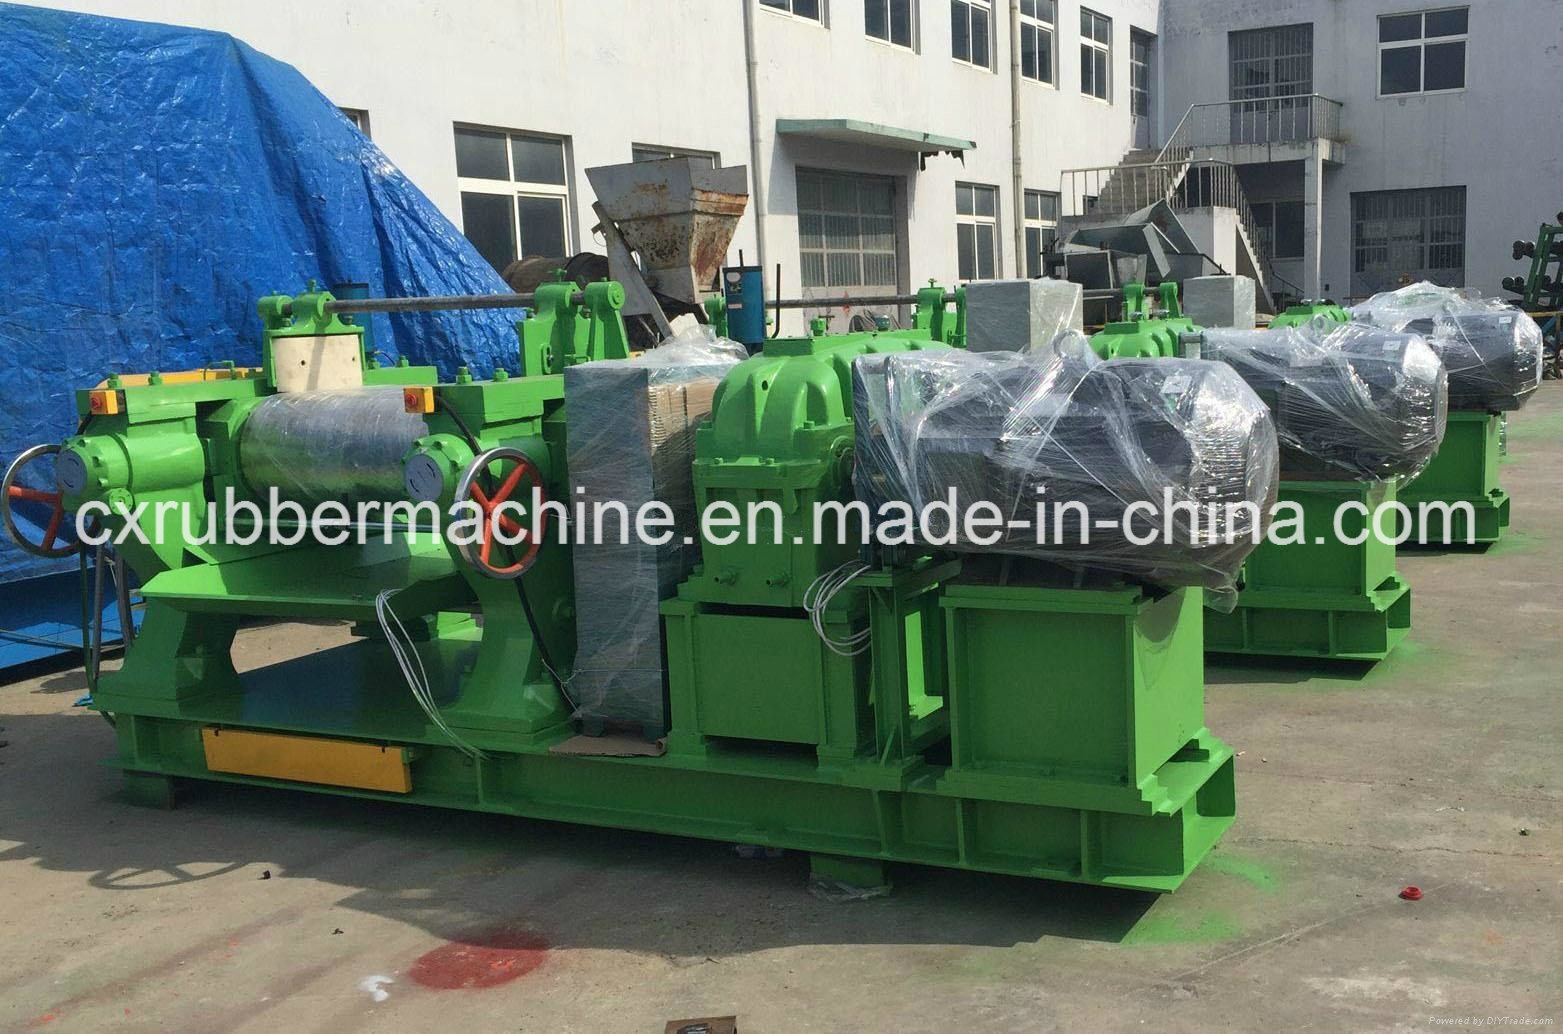 China Rubber Machine Manufacturer Good Sale Open Rubber Mixing Mill